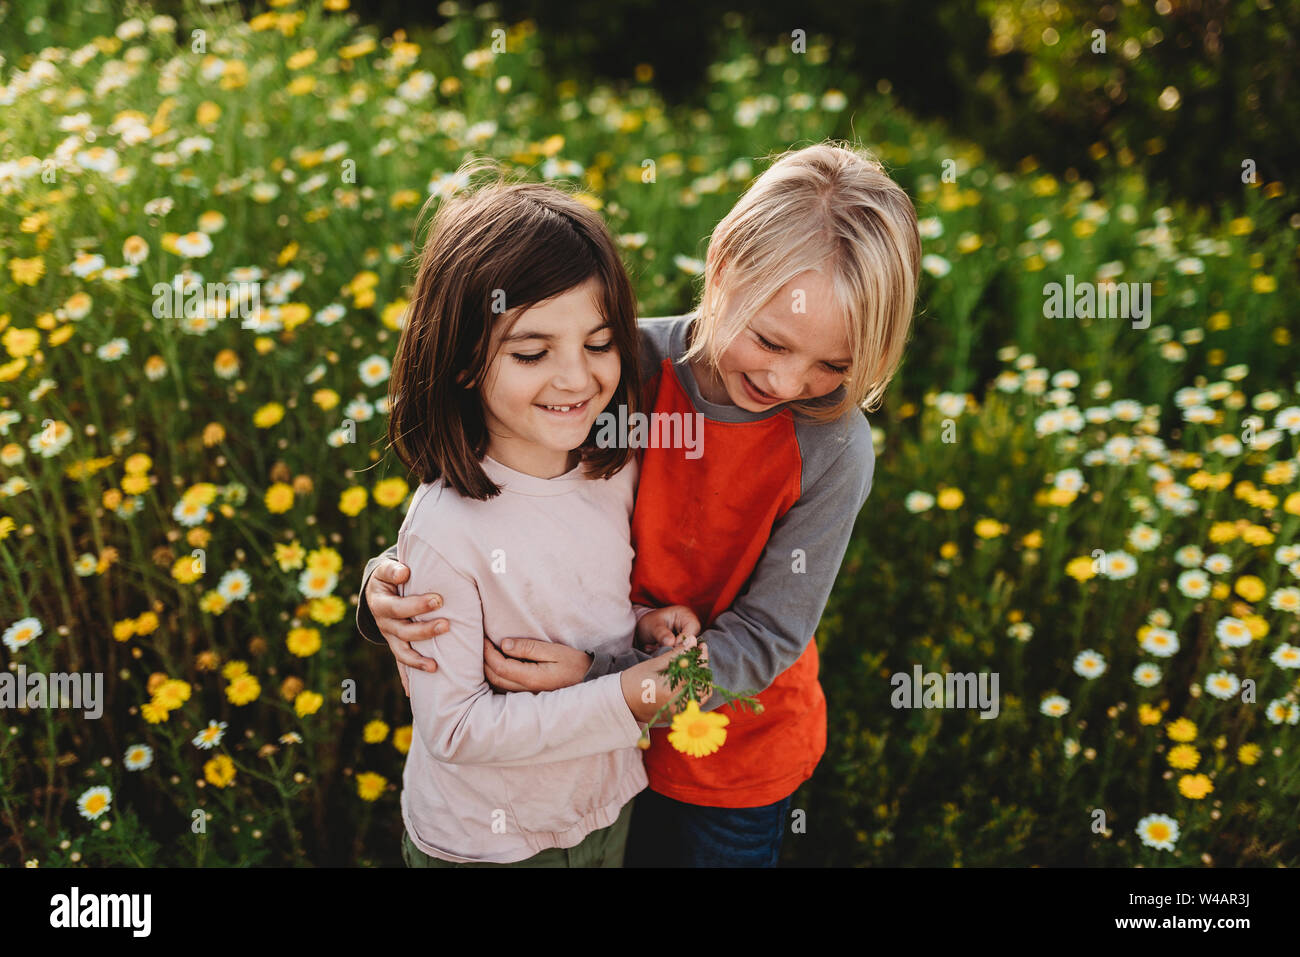 School-aged boy and girl hugging in field of flowers Stock Photo